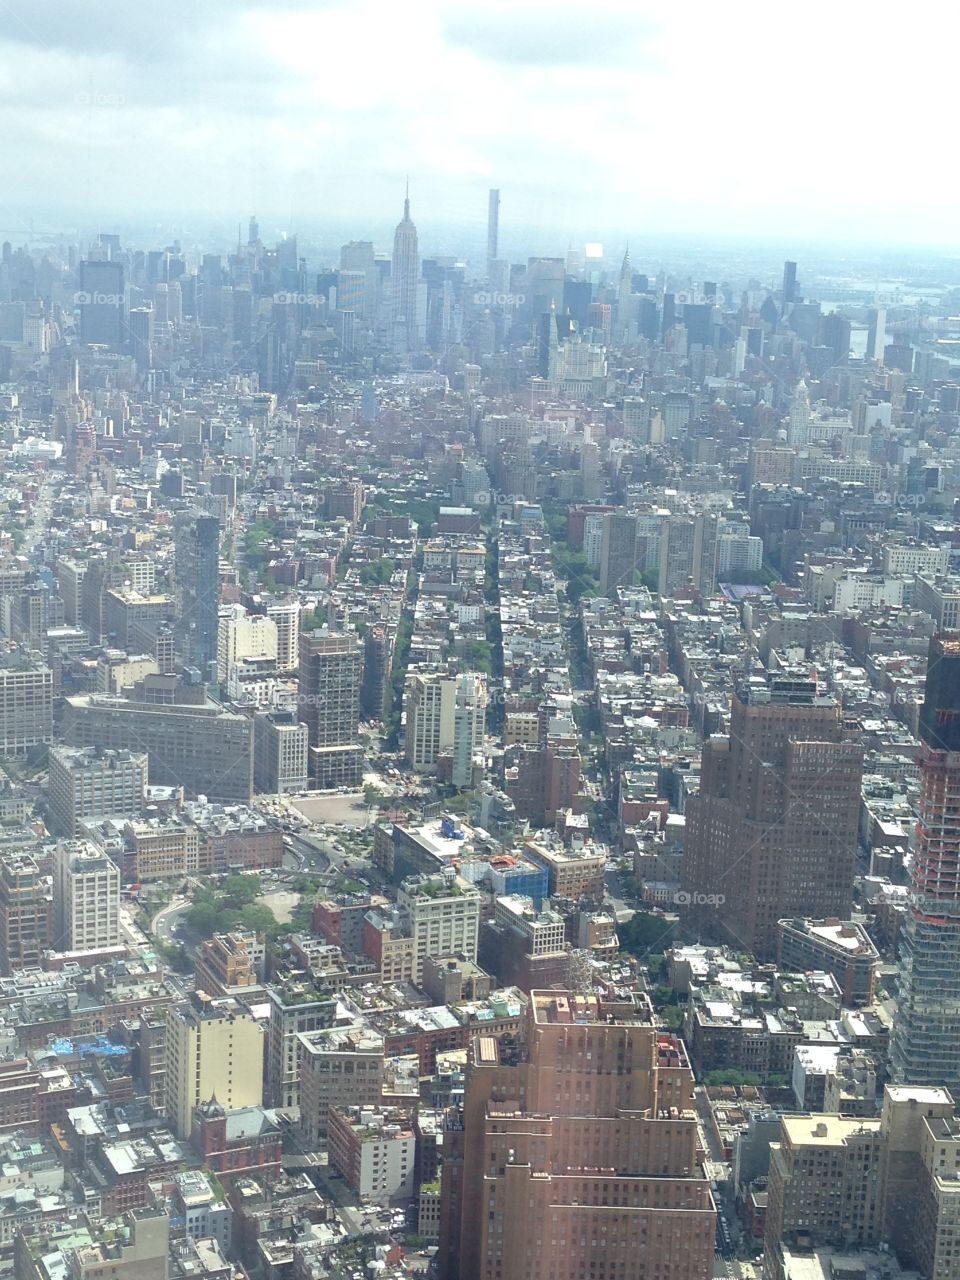 New York City from Above. View of New York City from the observatory of the Freedom Tower